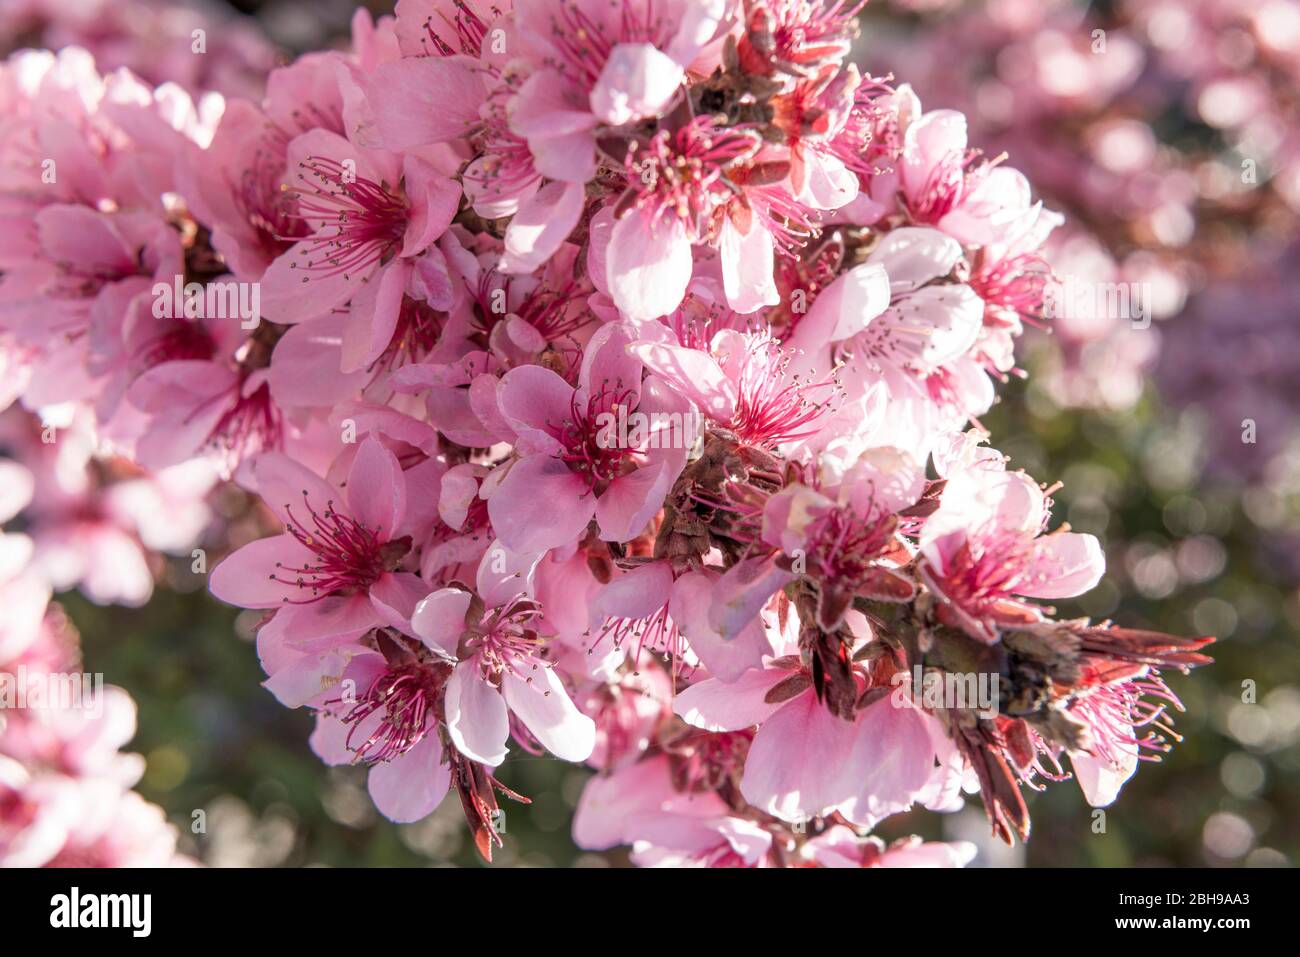 Peach blossoms, Prunus persica, family Rosaceae, orchard Stock Photo